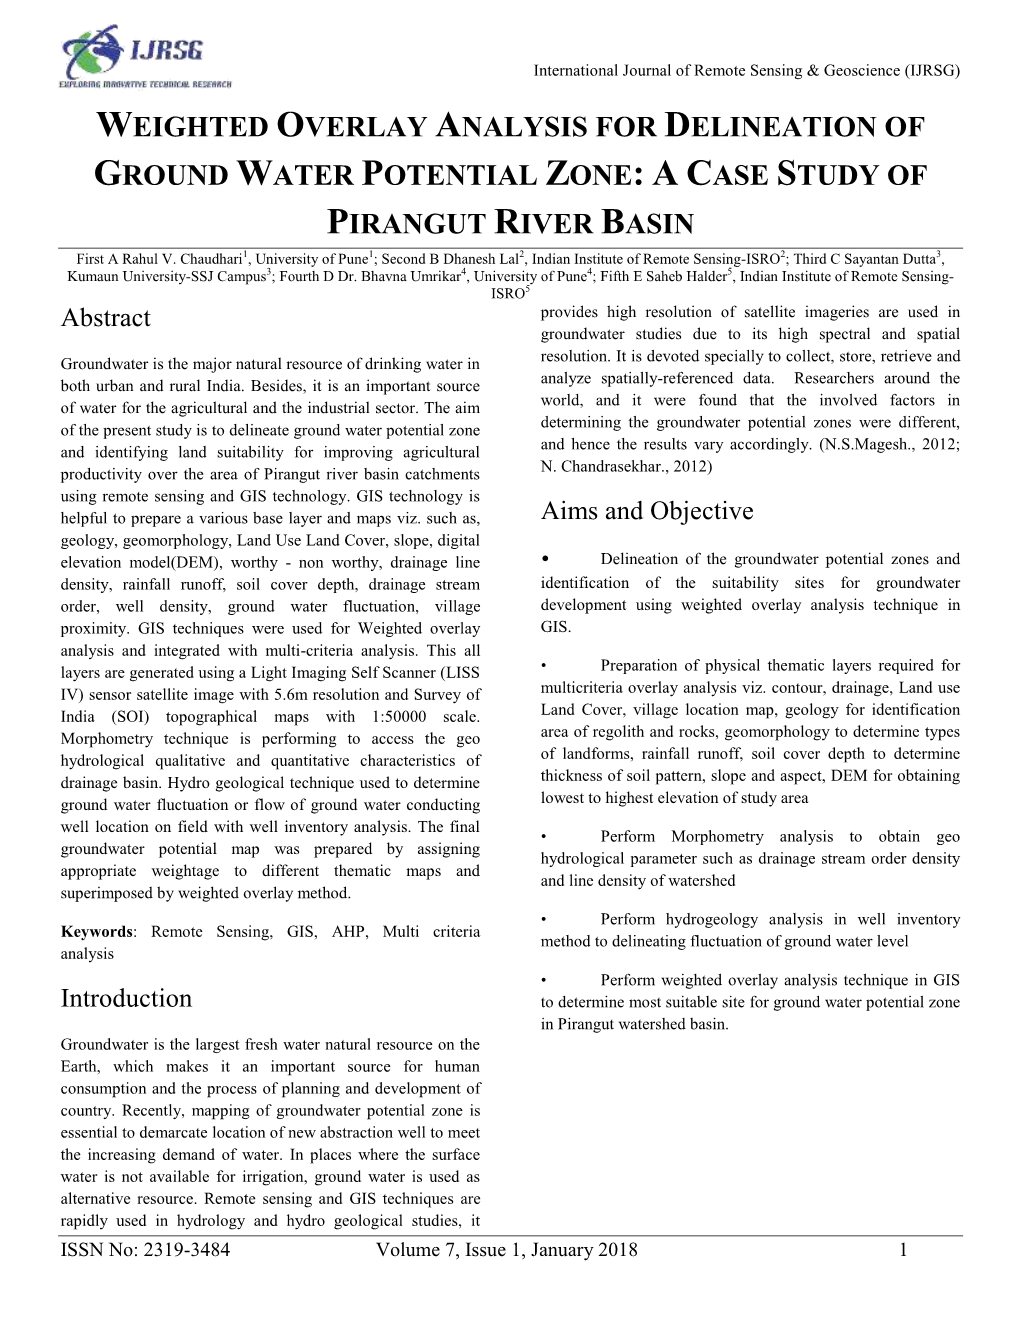 Weighted Overlay Analysis for Delineation of Ground Water Potential Zone: a C Ase Study of Pirangut River Basin